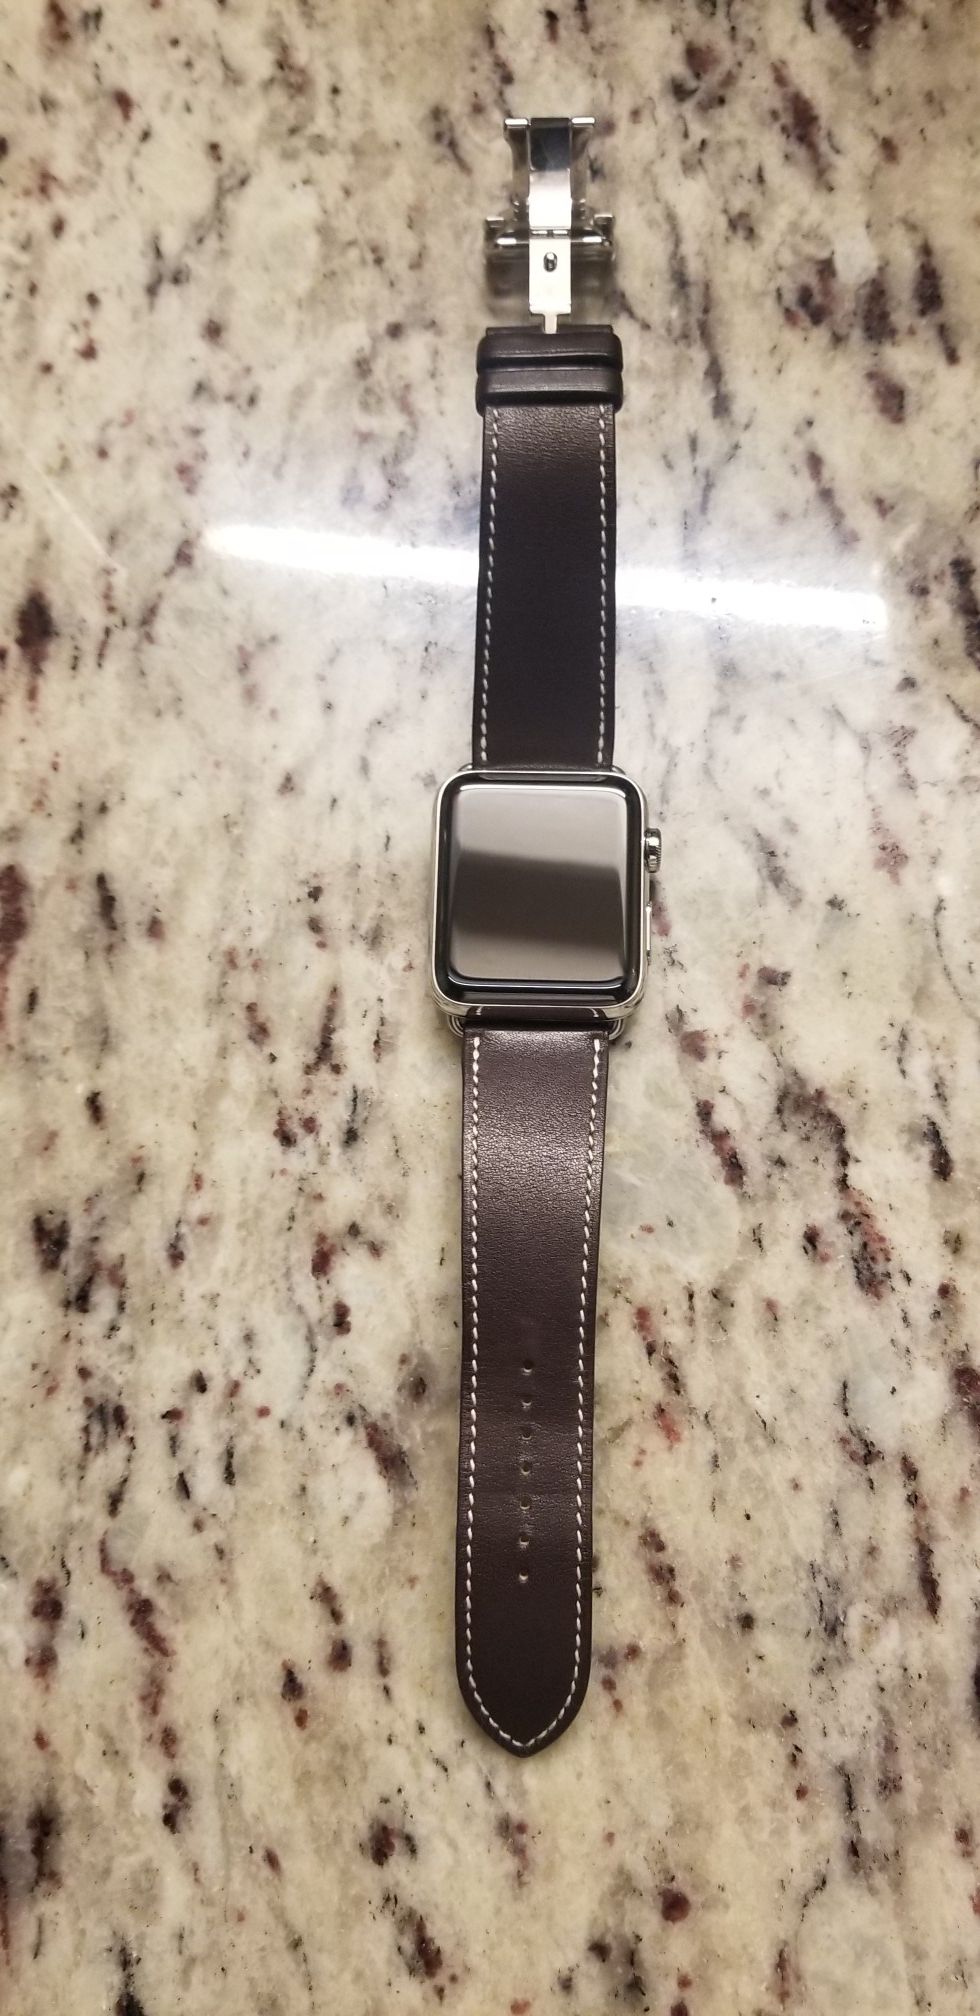 Apple watch series 3 Hermes edition for Sale in Baltimore, MD